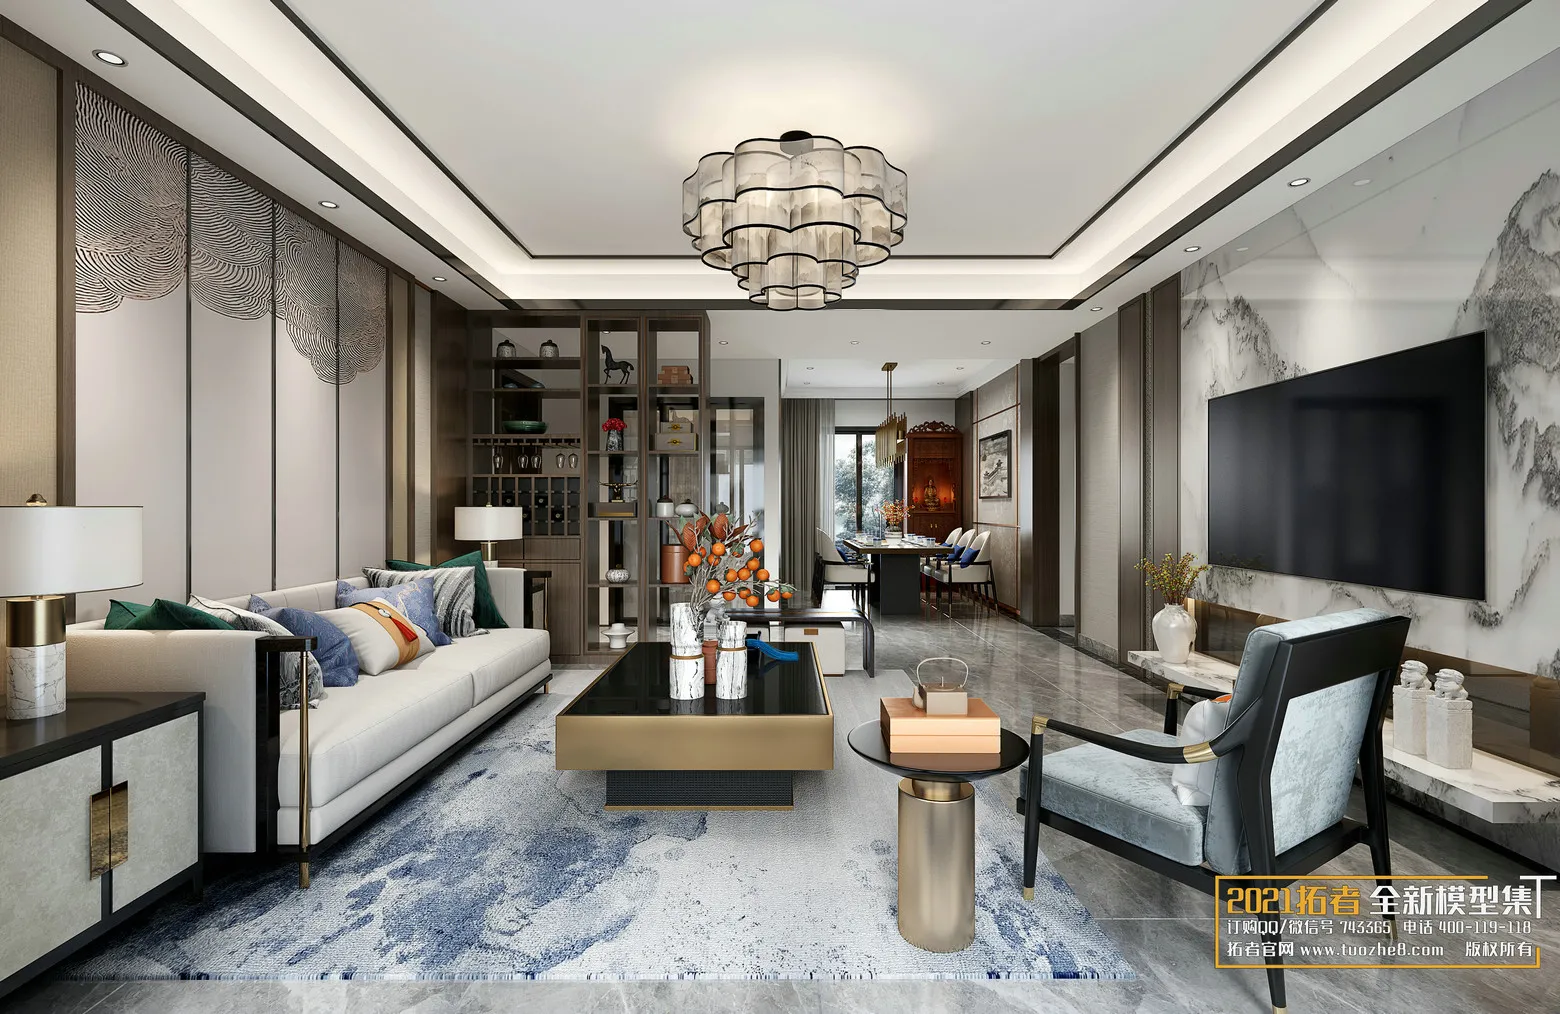 EXTENSION 2021 – 1. LIVING ROOM – 1.2. CHINESE STYLES – 35vr – VRAY